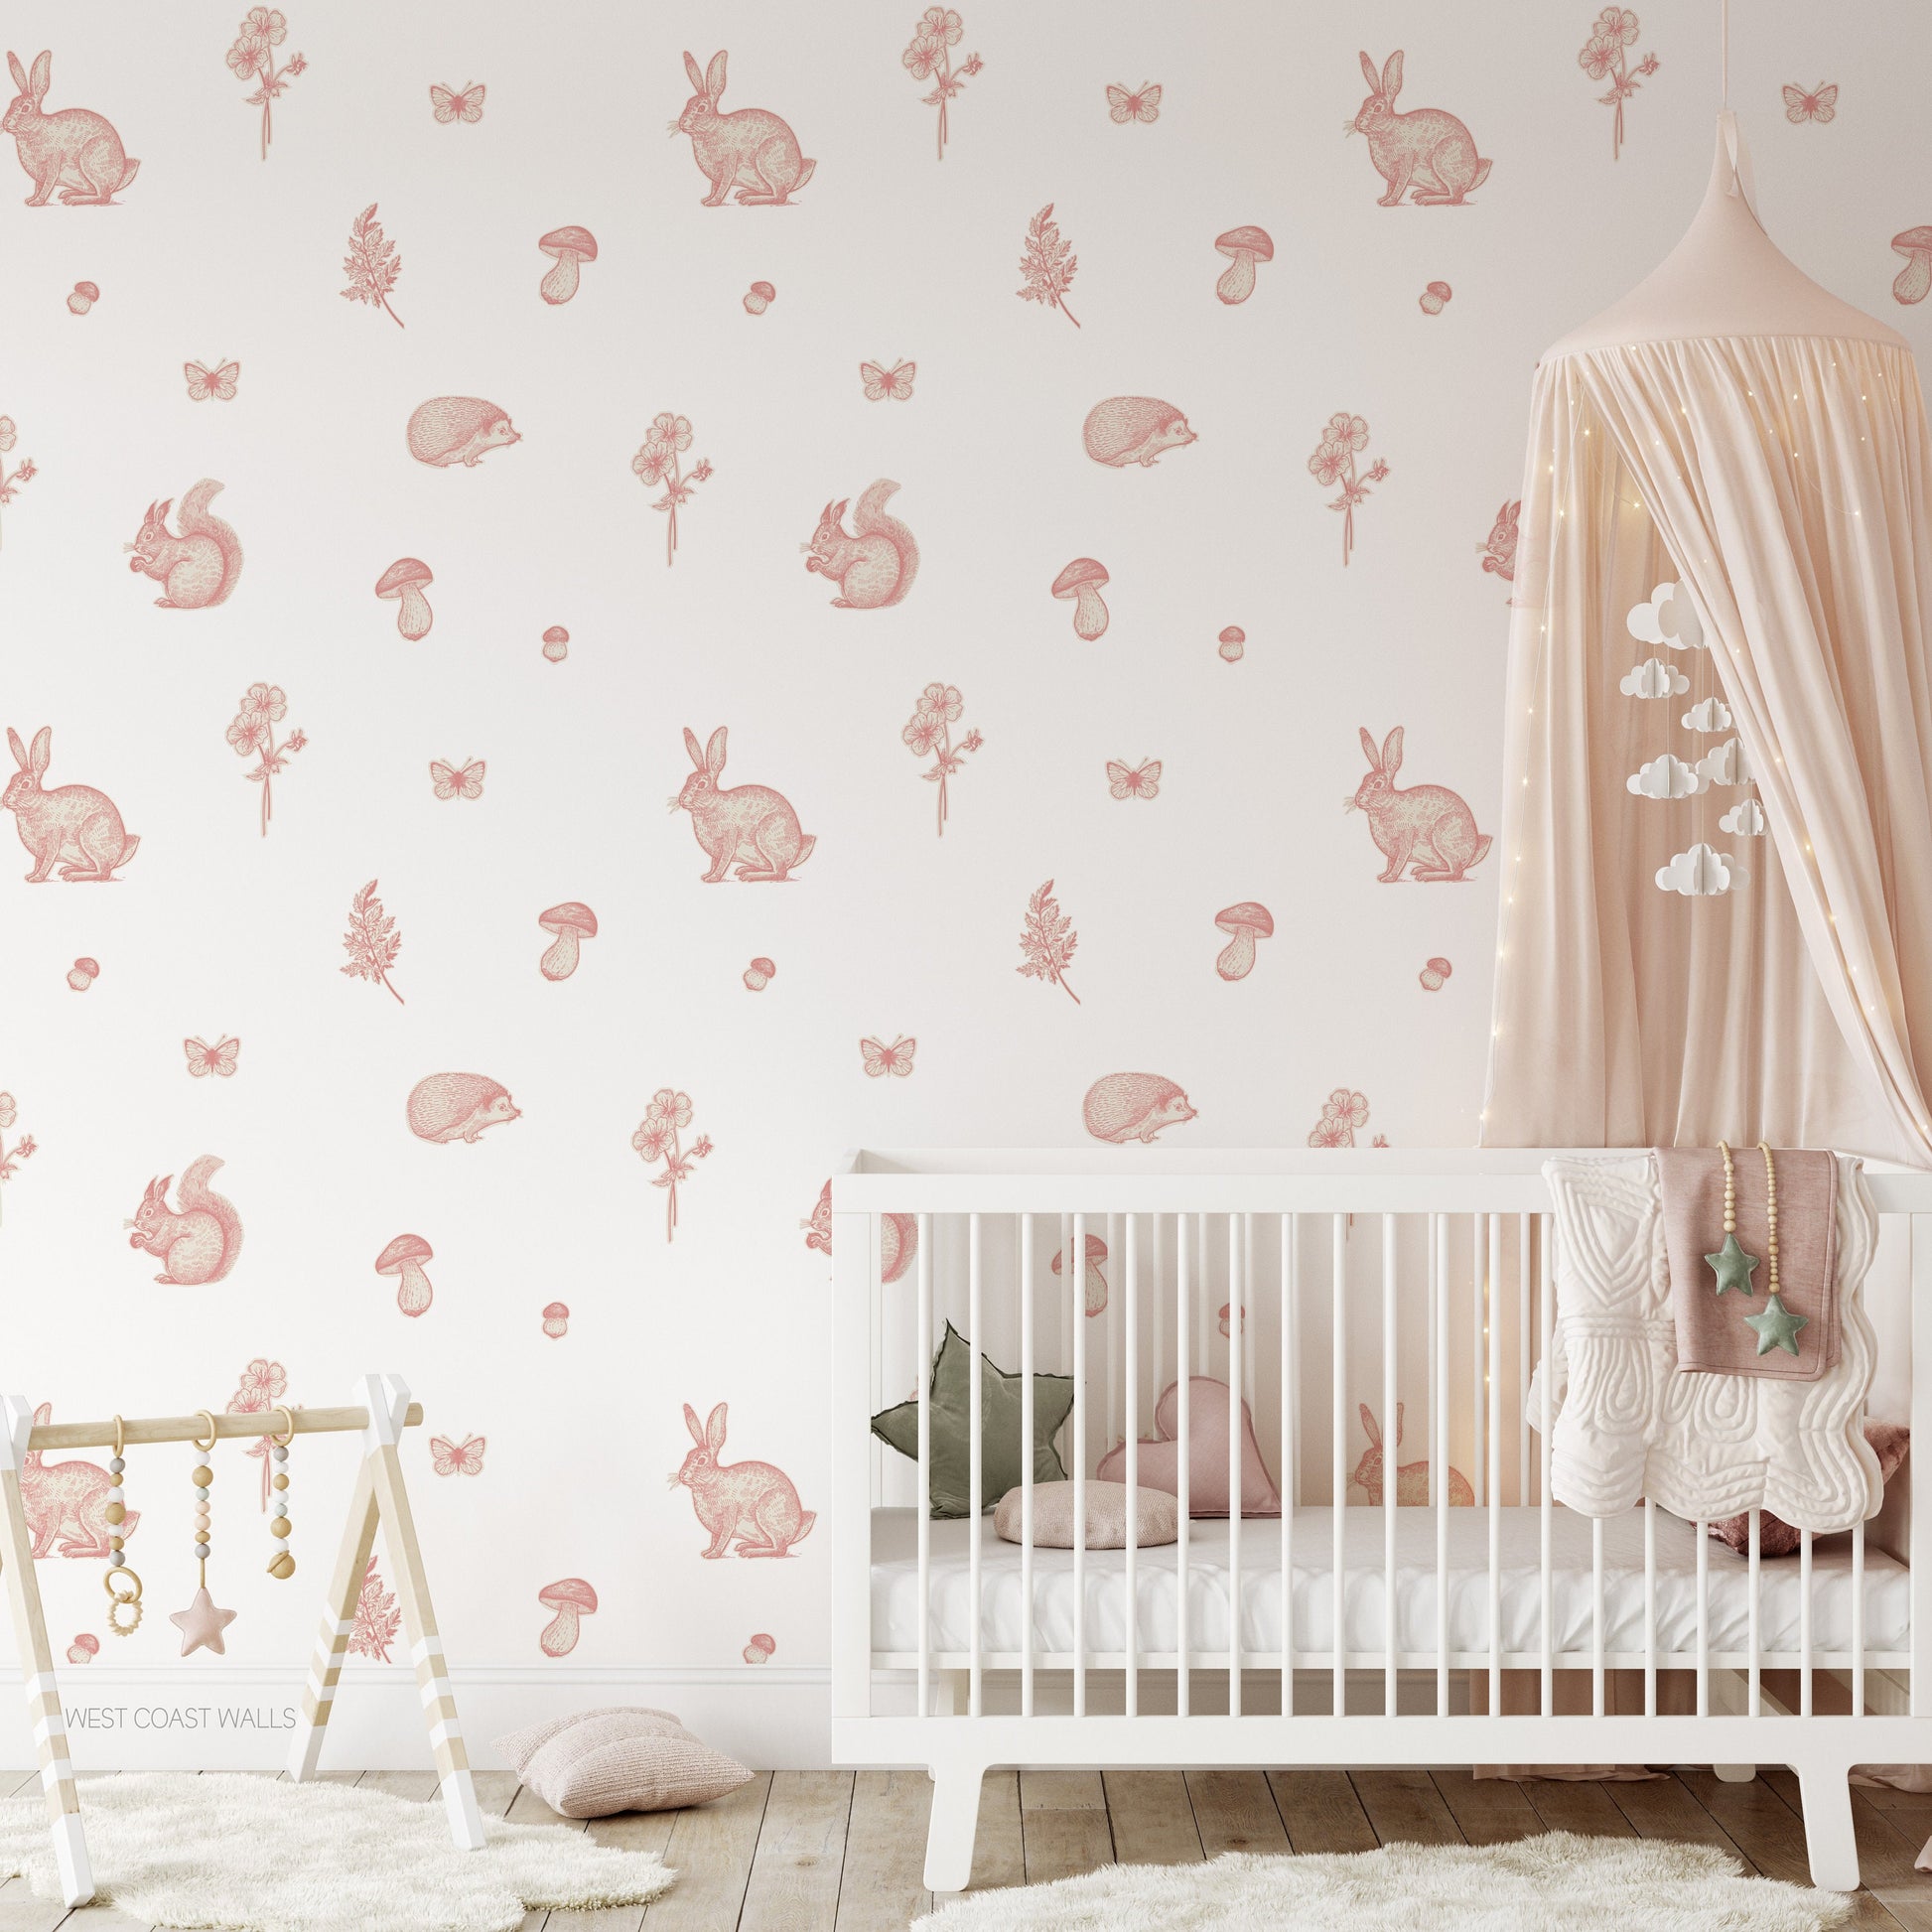 Whimsical Woodland Animal Removable Wall Decals